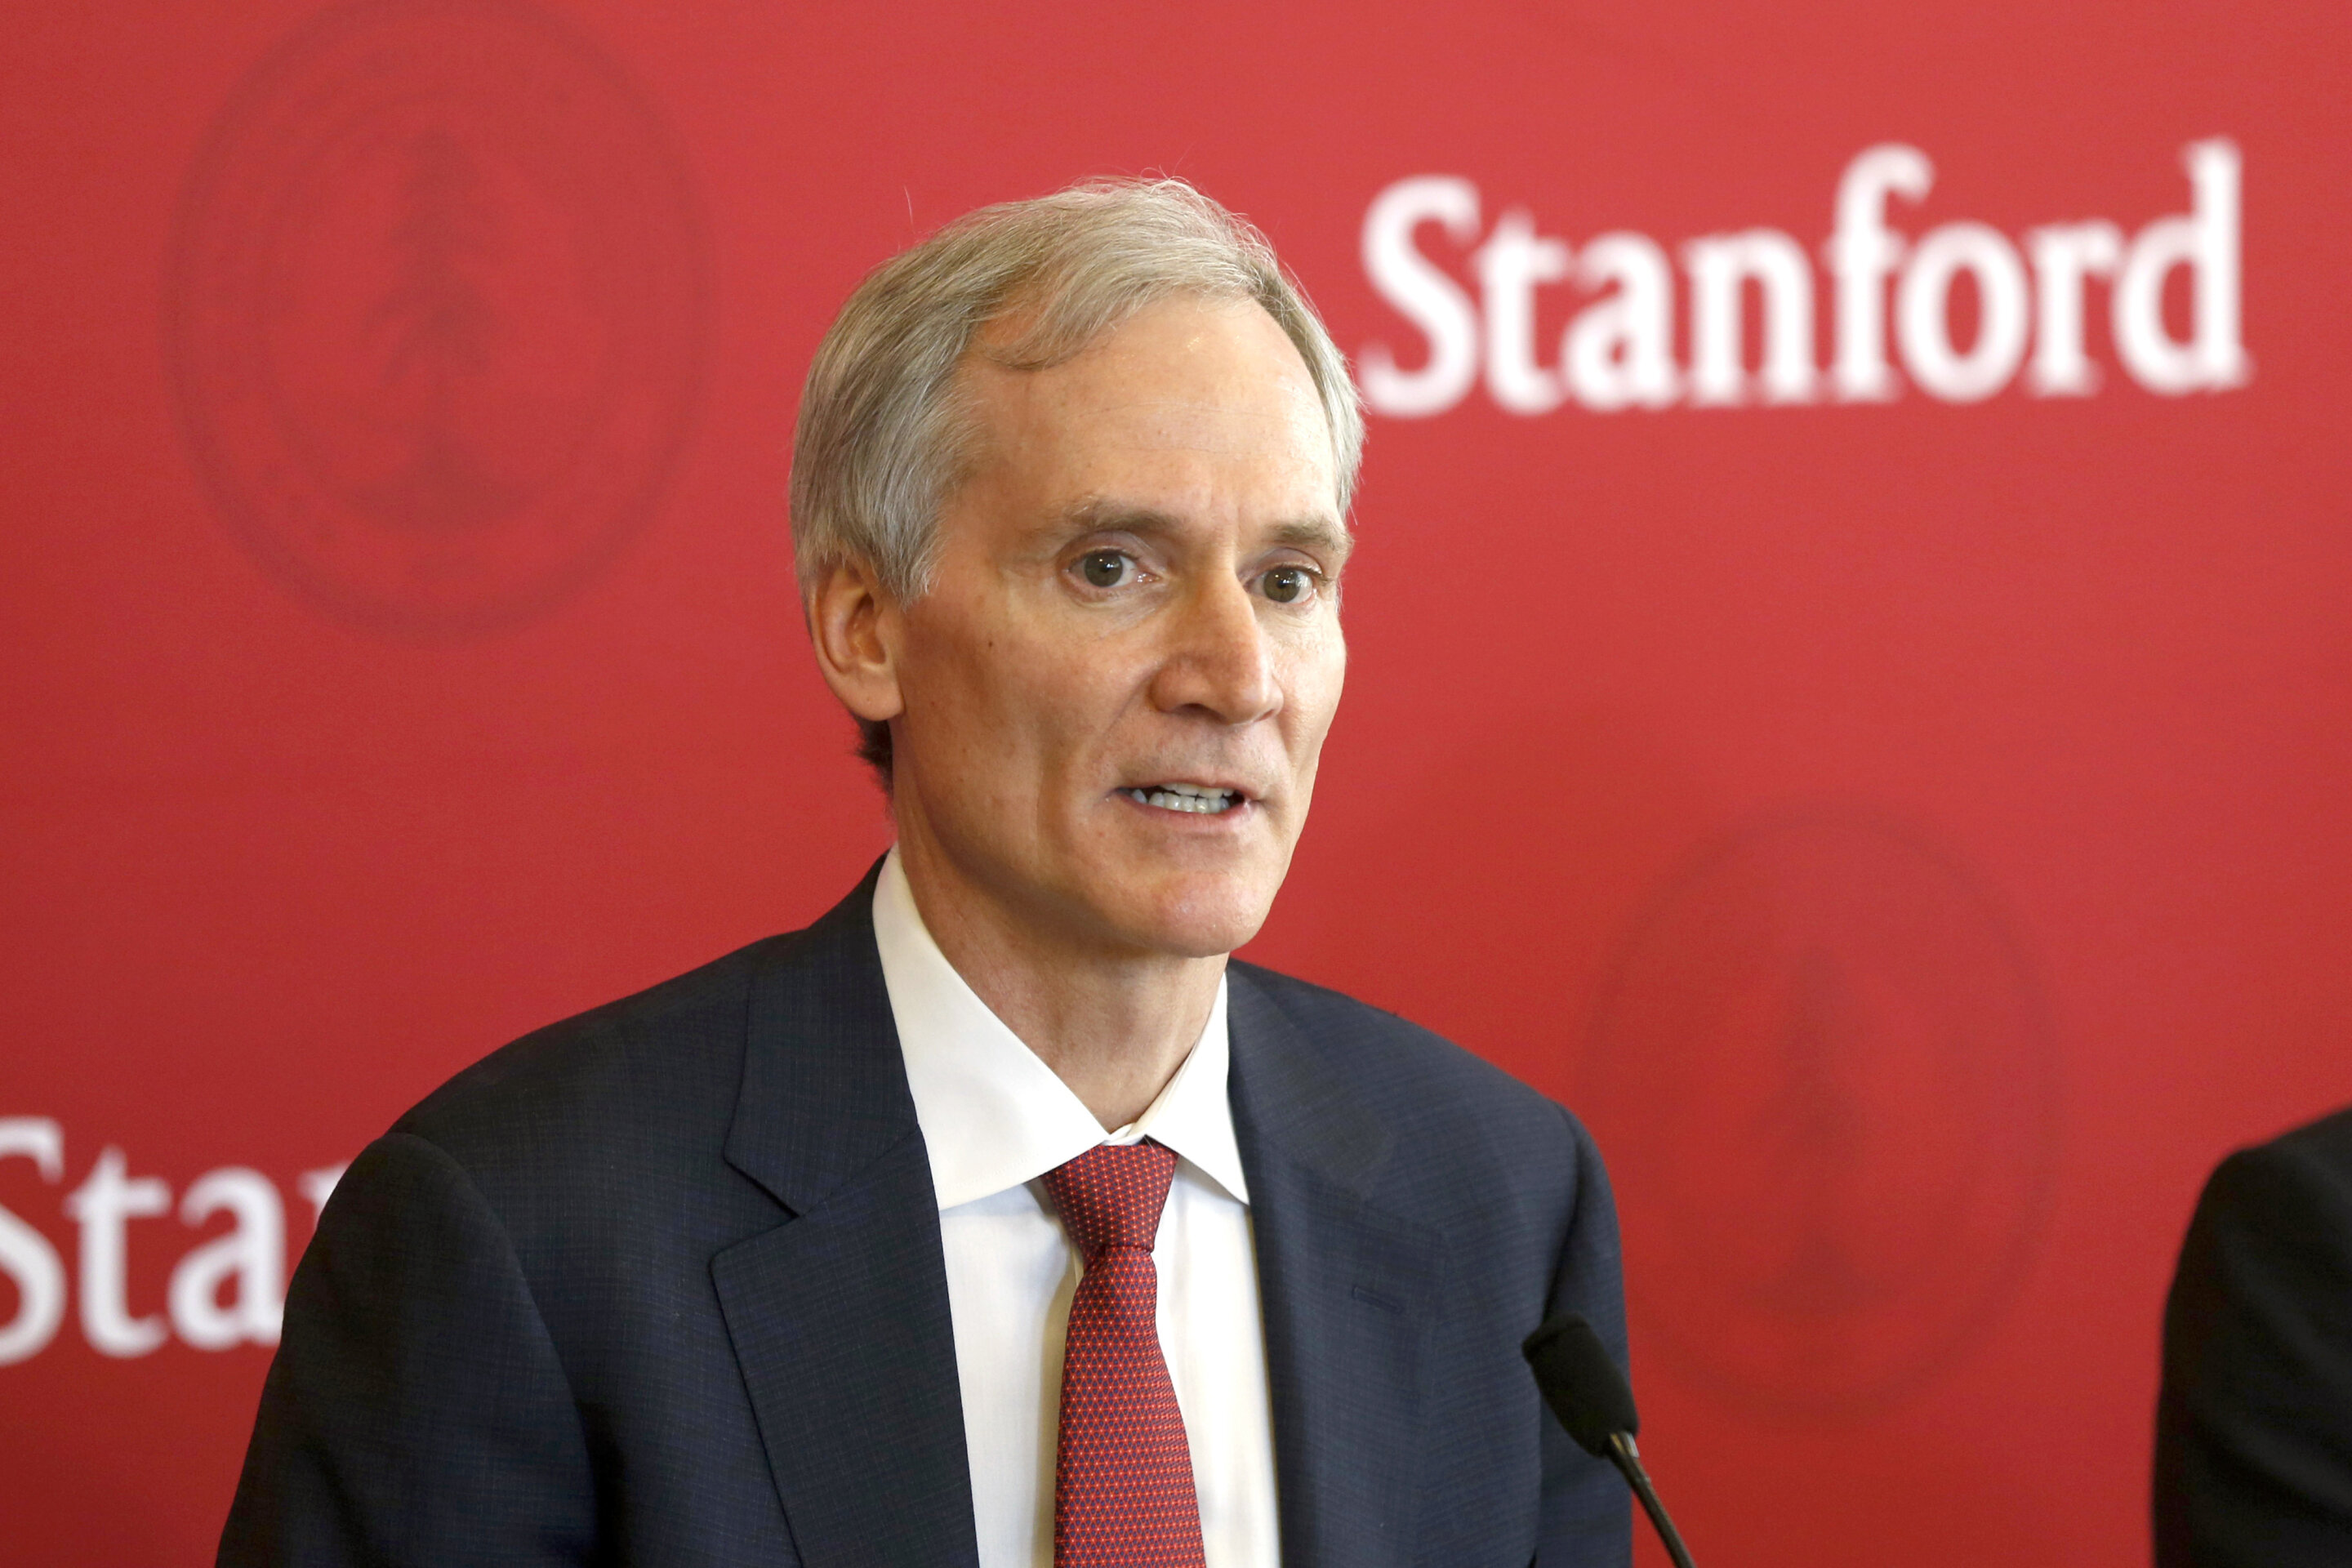 Stanford University president announces resignation over concerns about ...